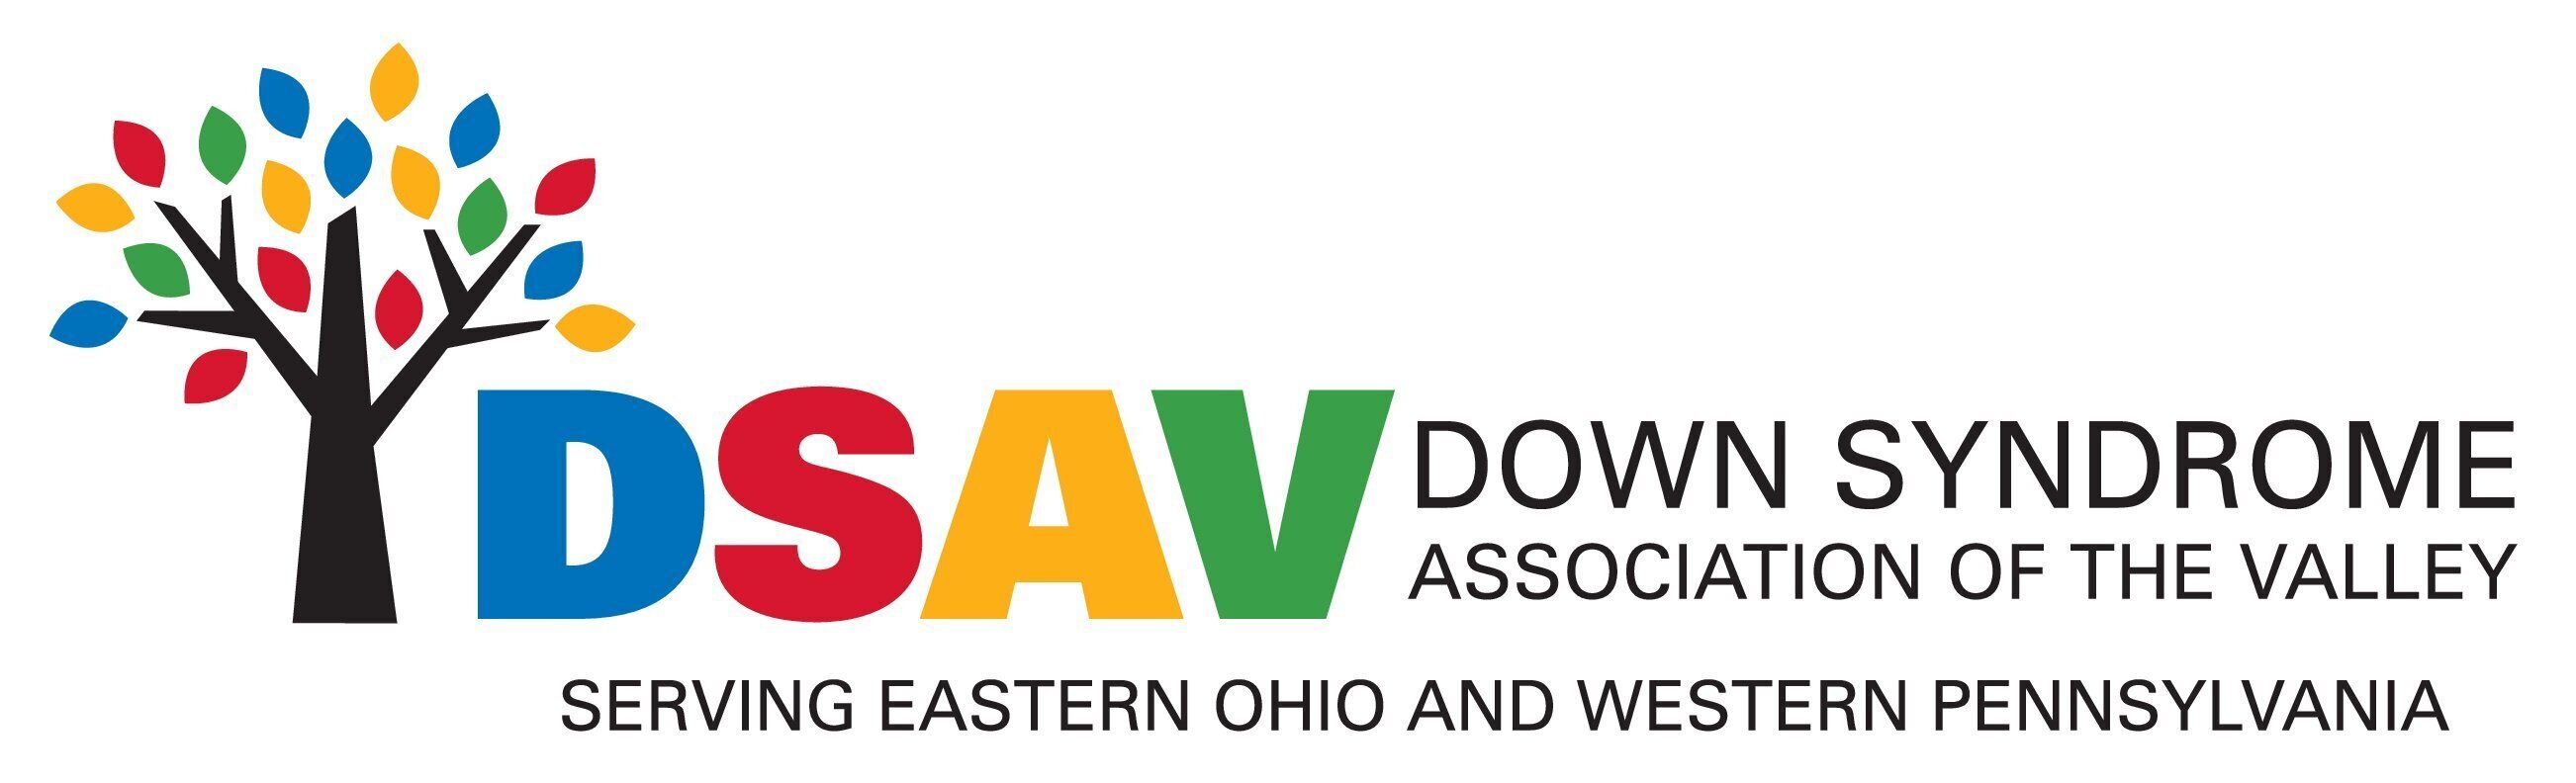 (DSAV) Down Syndrome Association of the Valley